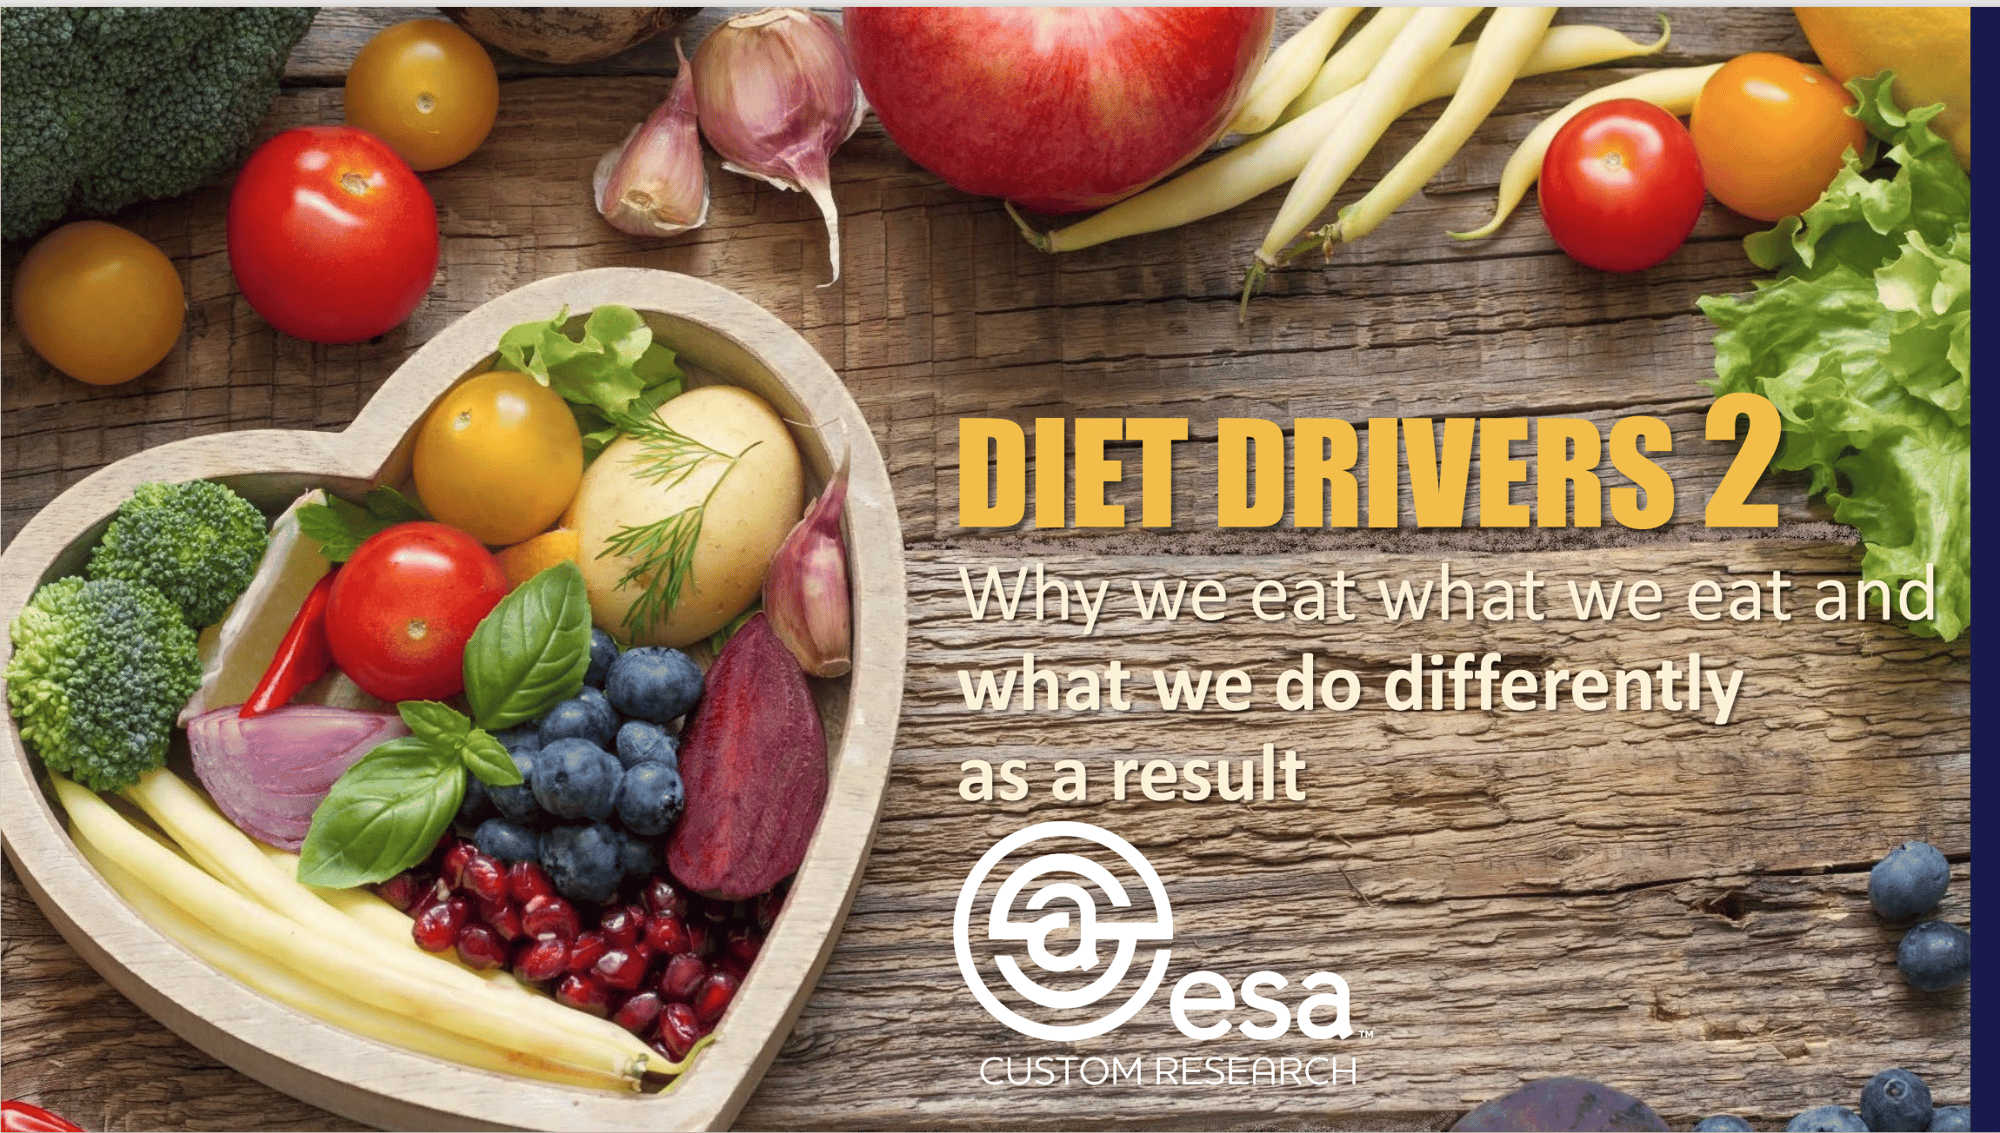 Diet Drivers 2 -- Why we eat what we eat and what we do differently as a result.